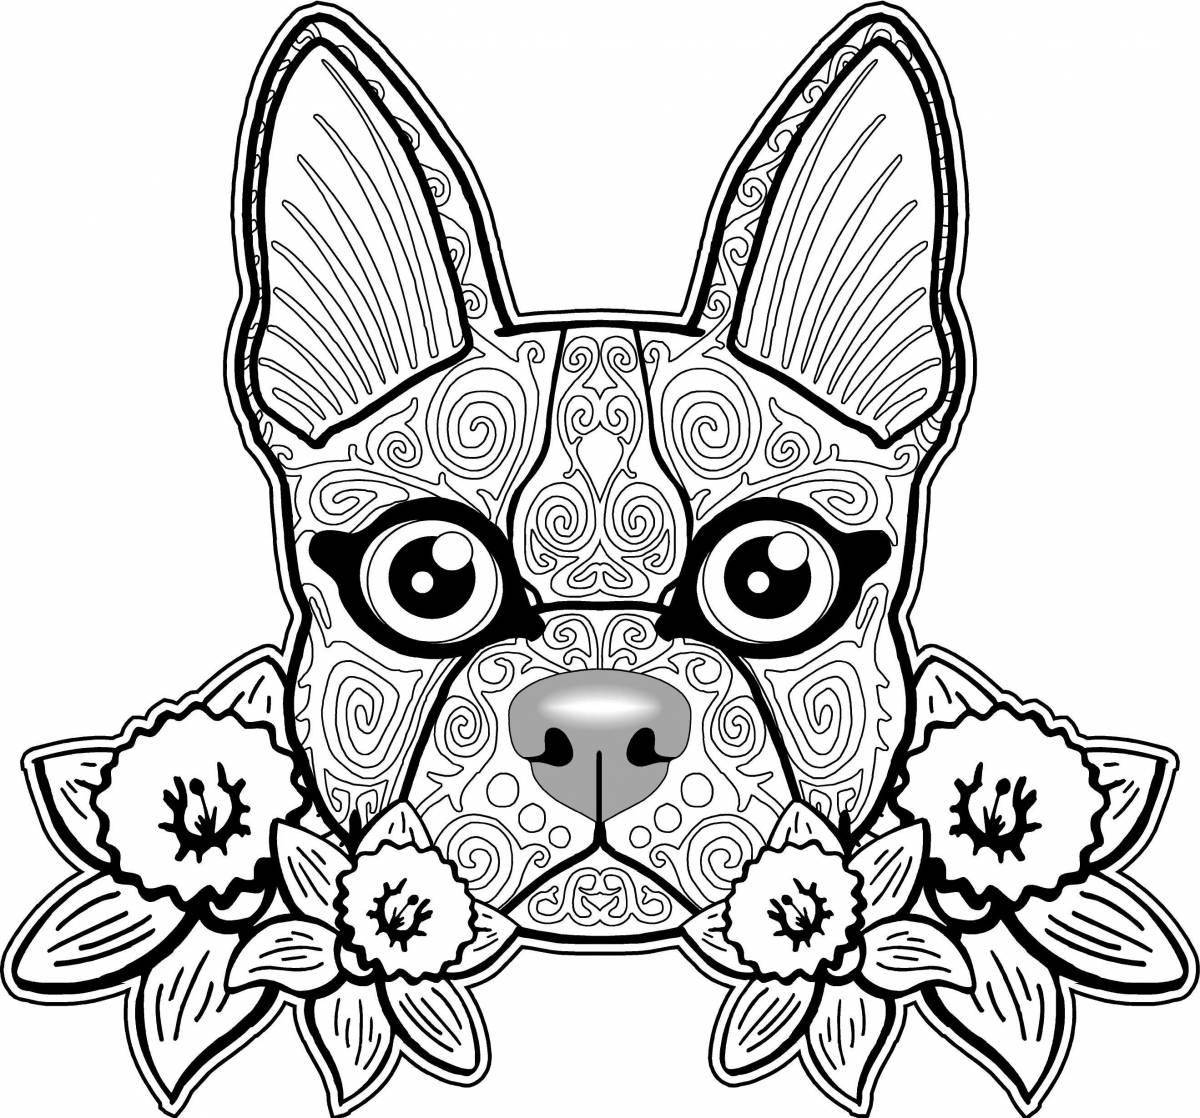 Cute cute dog coloring book for girls